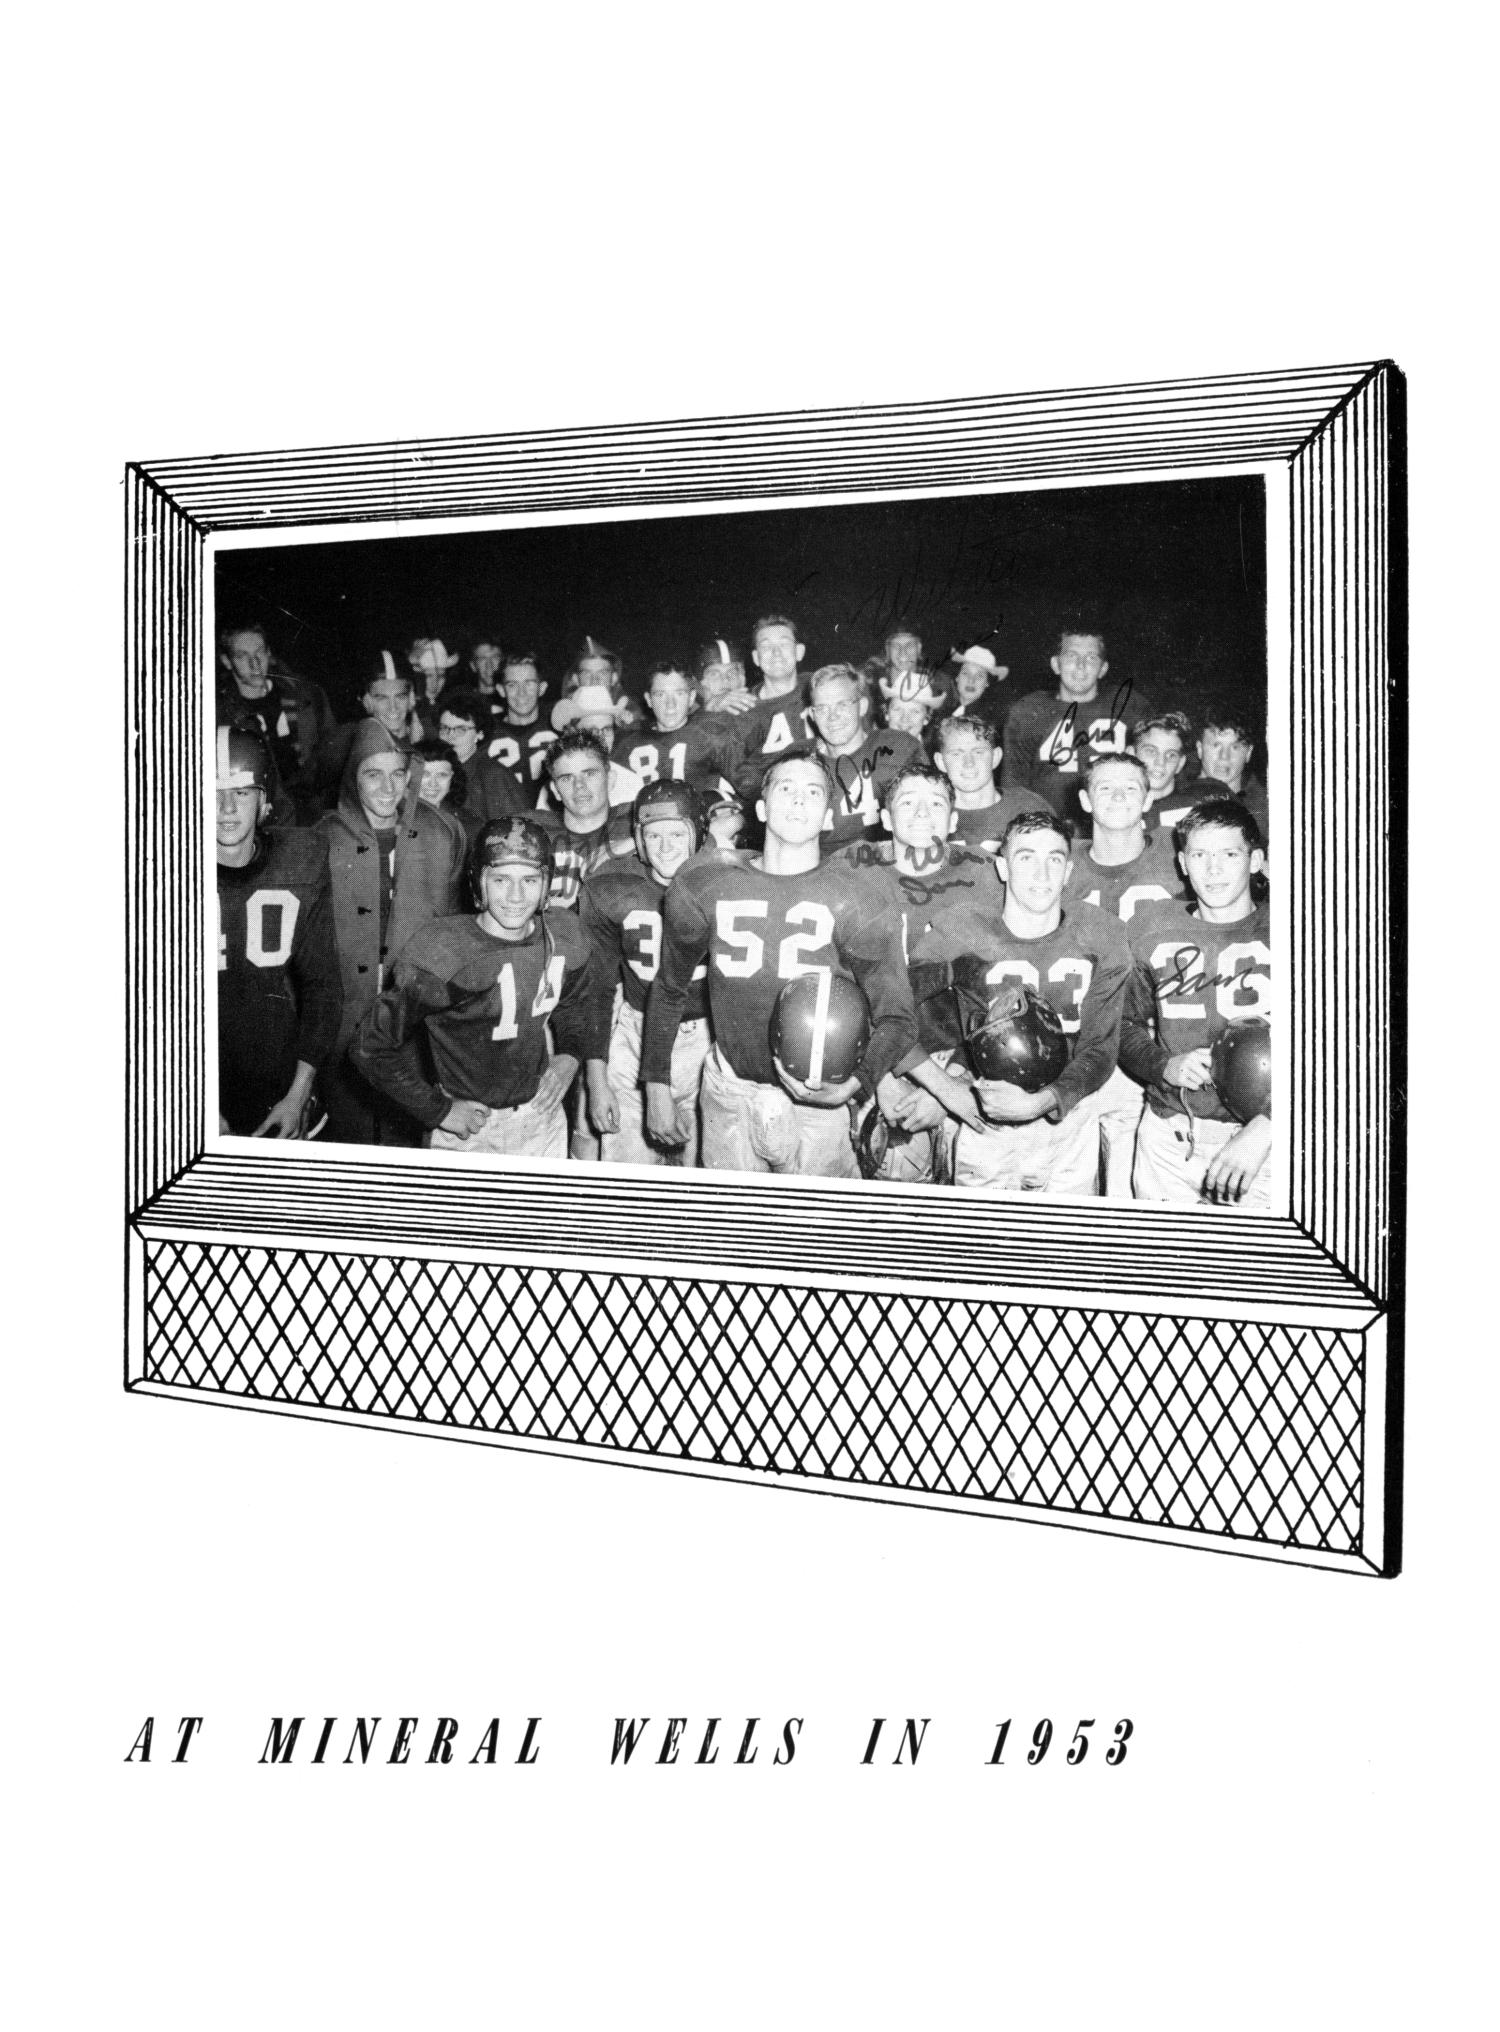 The Burro, Yearbook of Mineral Wells High School, 1953
                                                
                                                    55
                                                